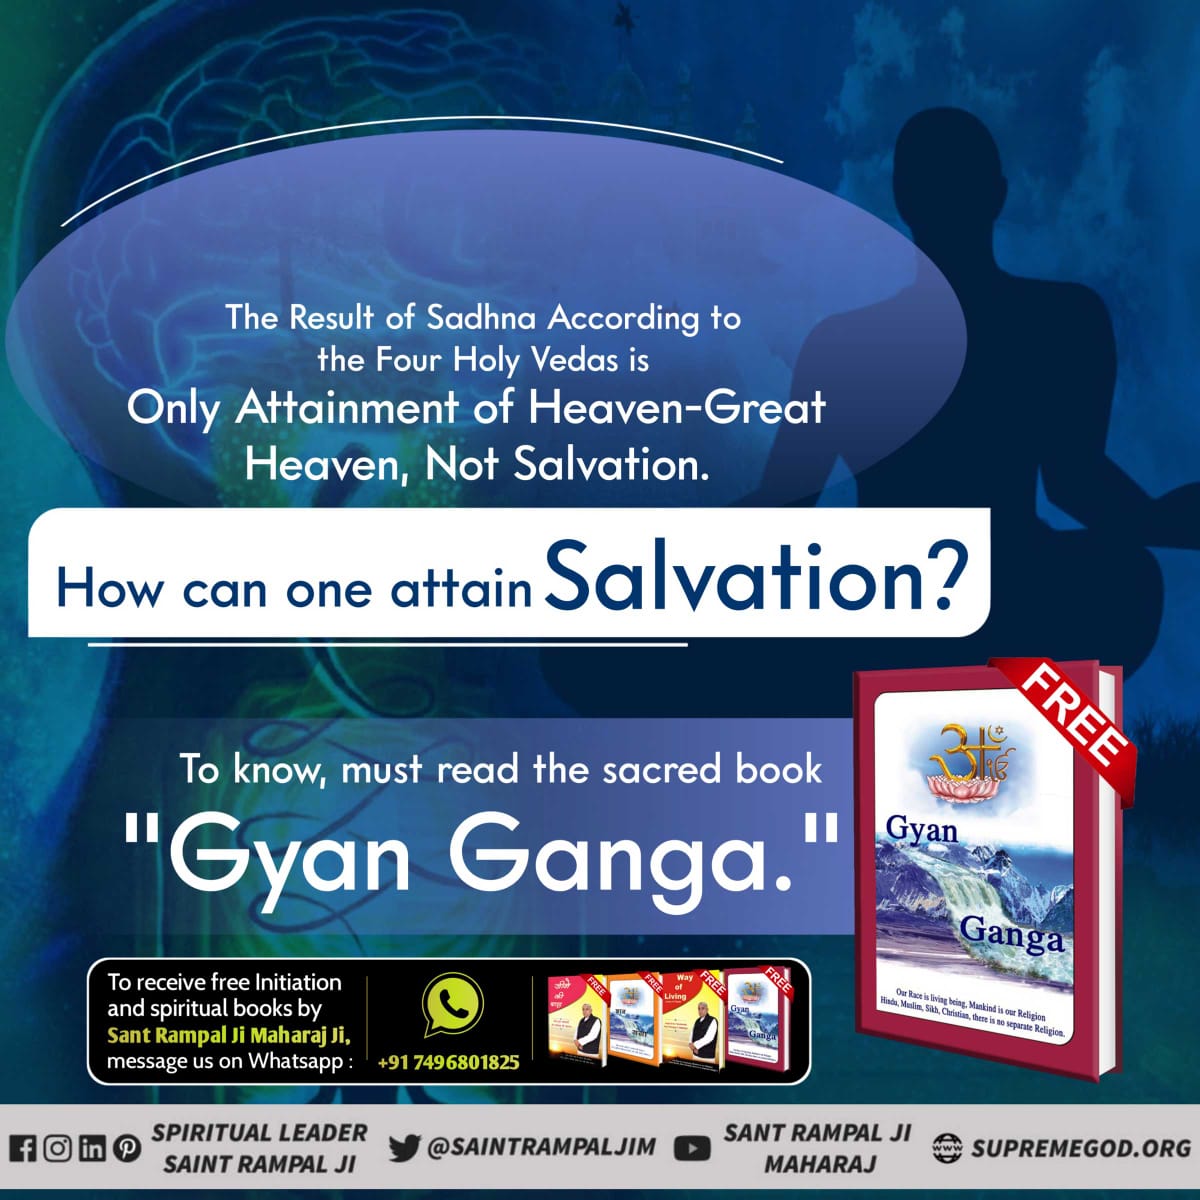 #GodMorningFriday
#ऐसे_सुख_देता_है_भगवान
The Result of Sadhna According to the Four Holy Vedas is
Only Attainment of Heaven-Great Heaven, Not Salvation.
How can one attain Salvation?
Visit our YouTube Channel: Satlok Ashram